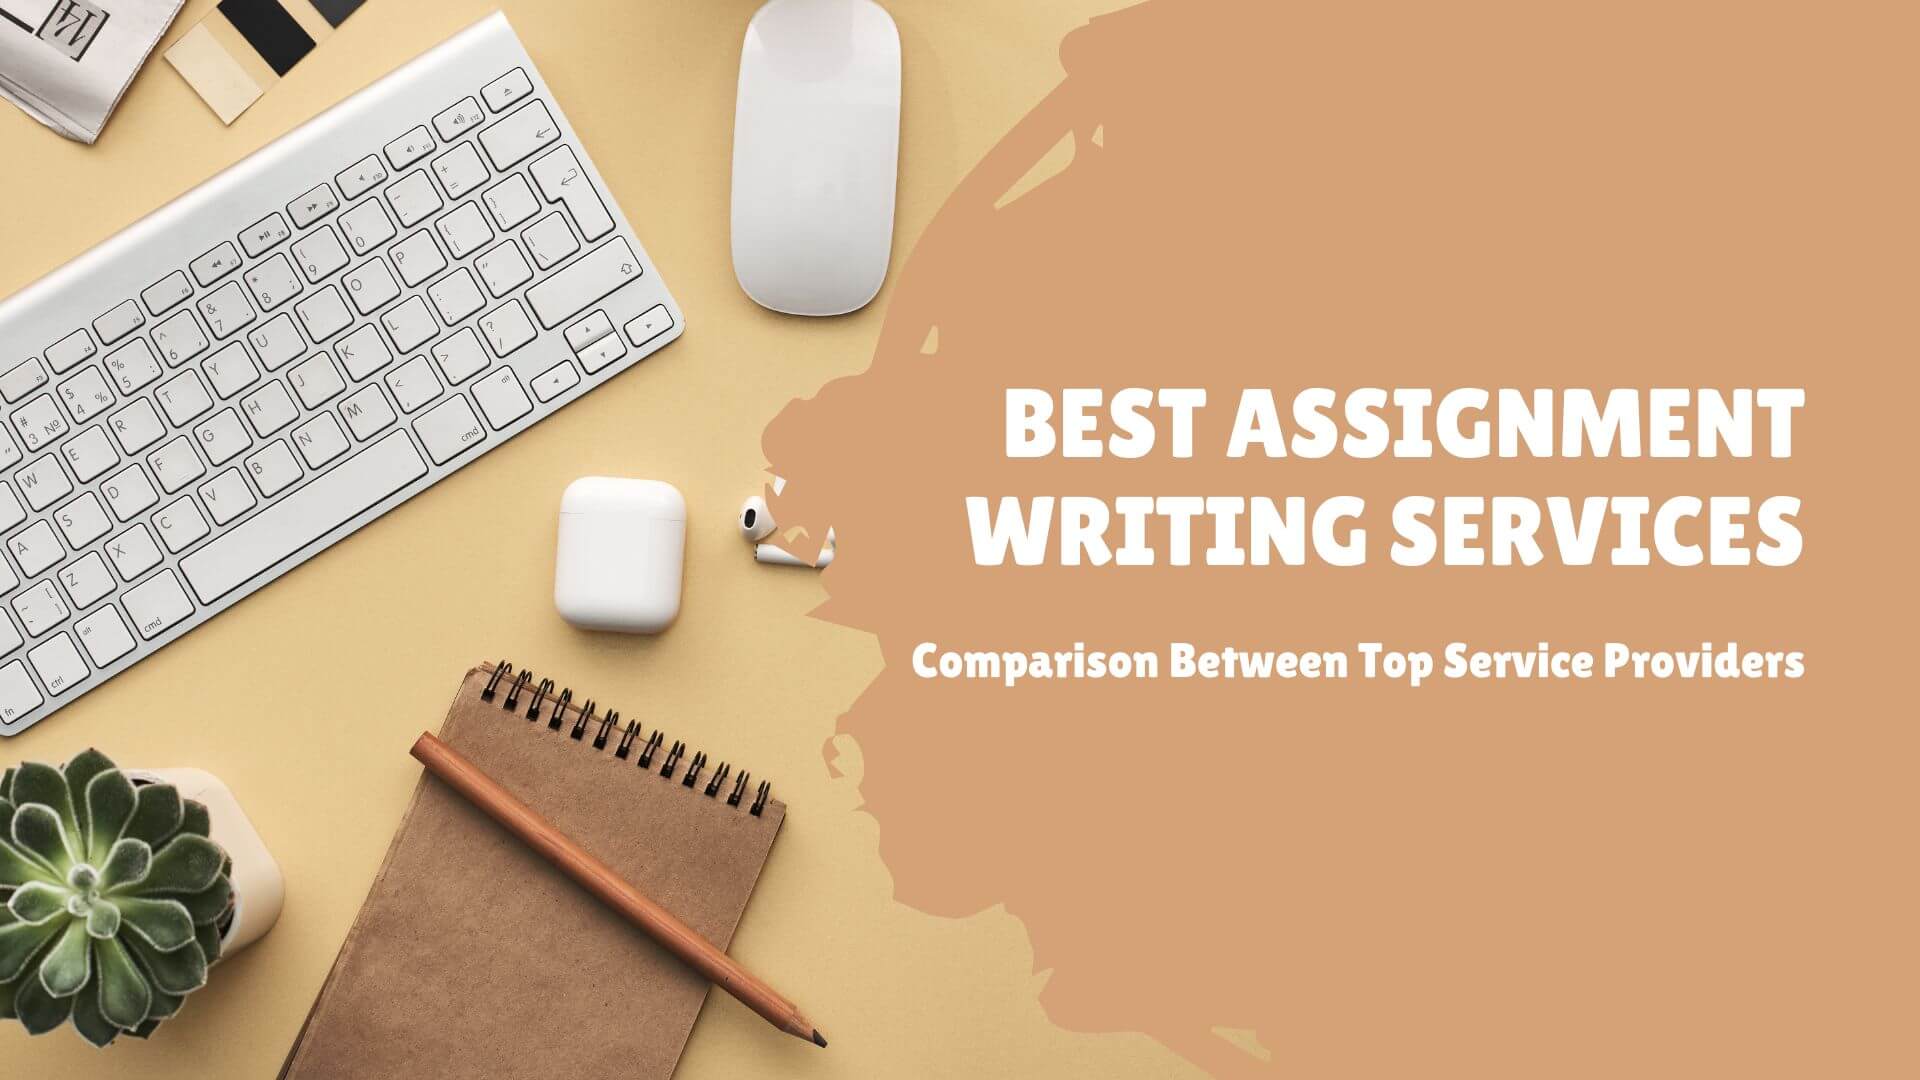 A List of Best Assignment Writing Services - a Comparison Between Top Service Providers